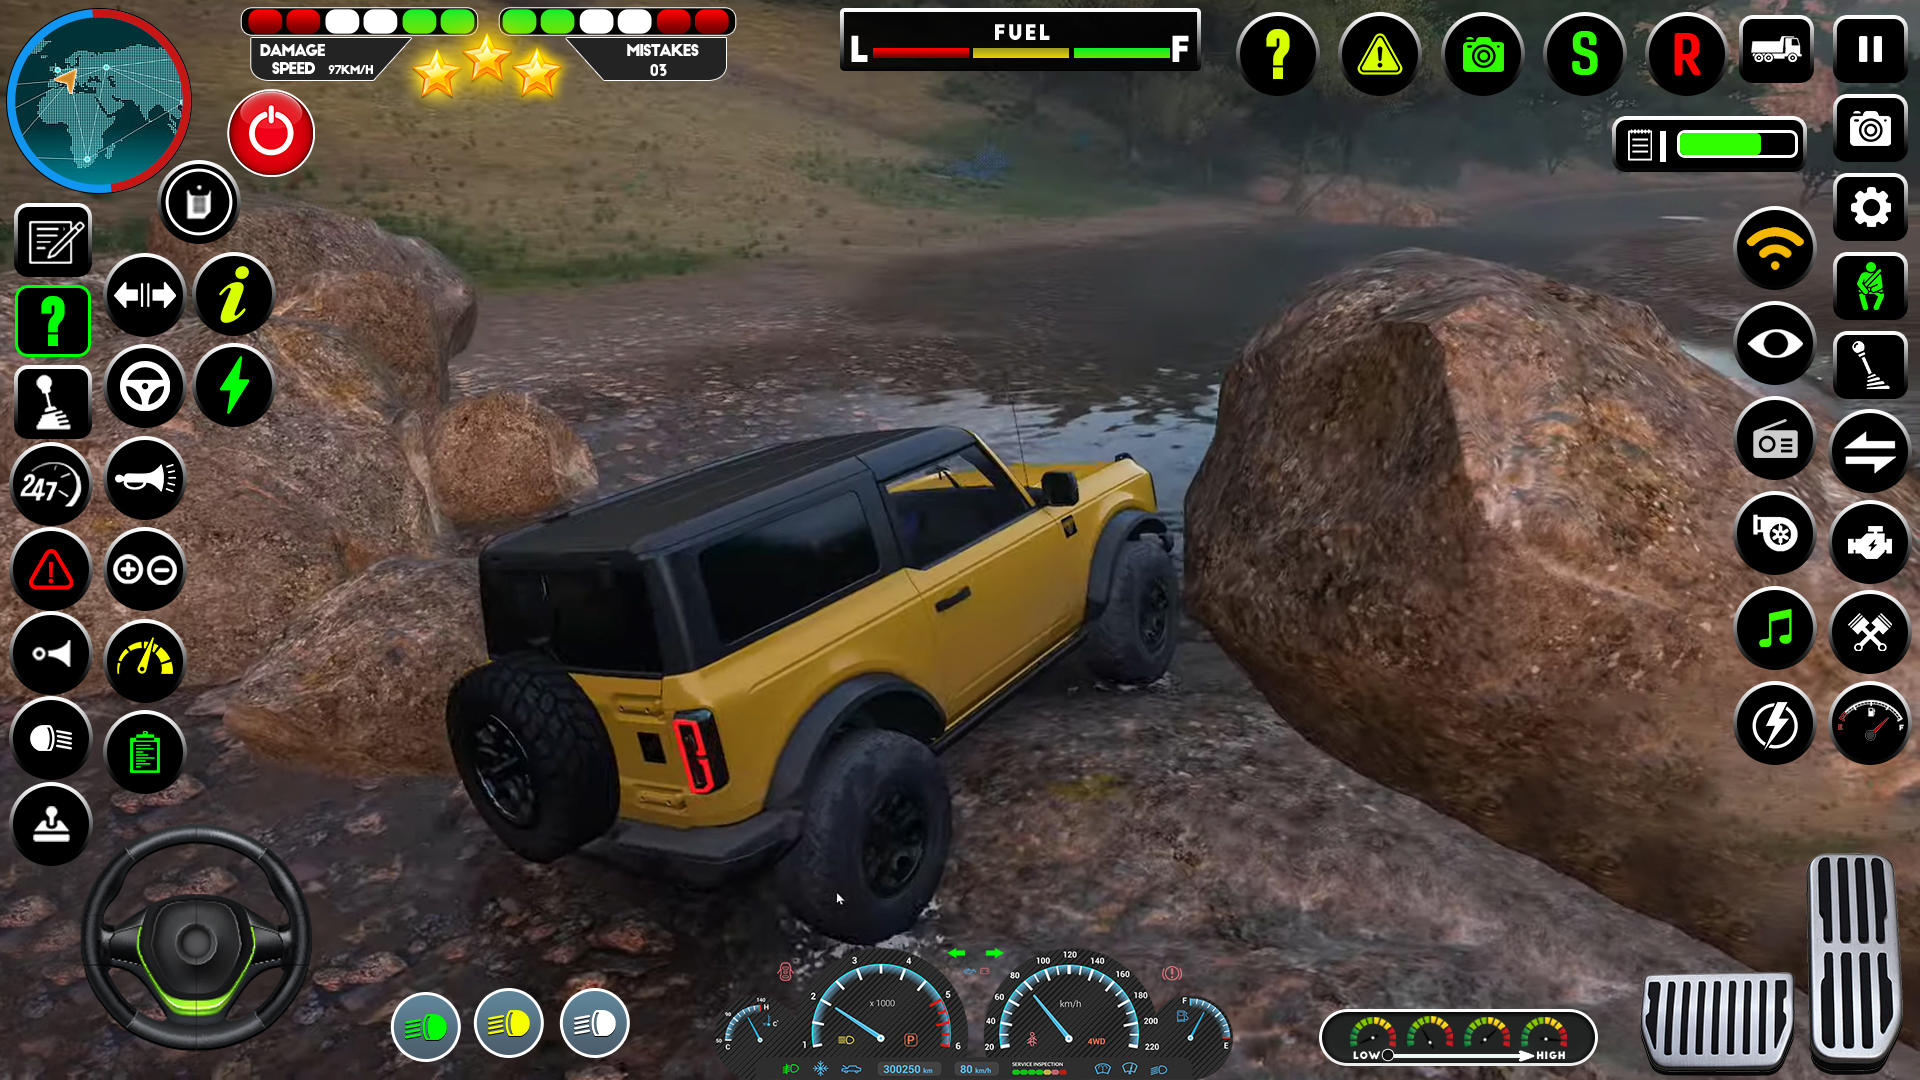 Offroad Jeep Driving:Jeep Game screenshot game